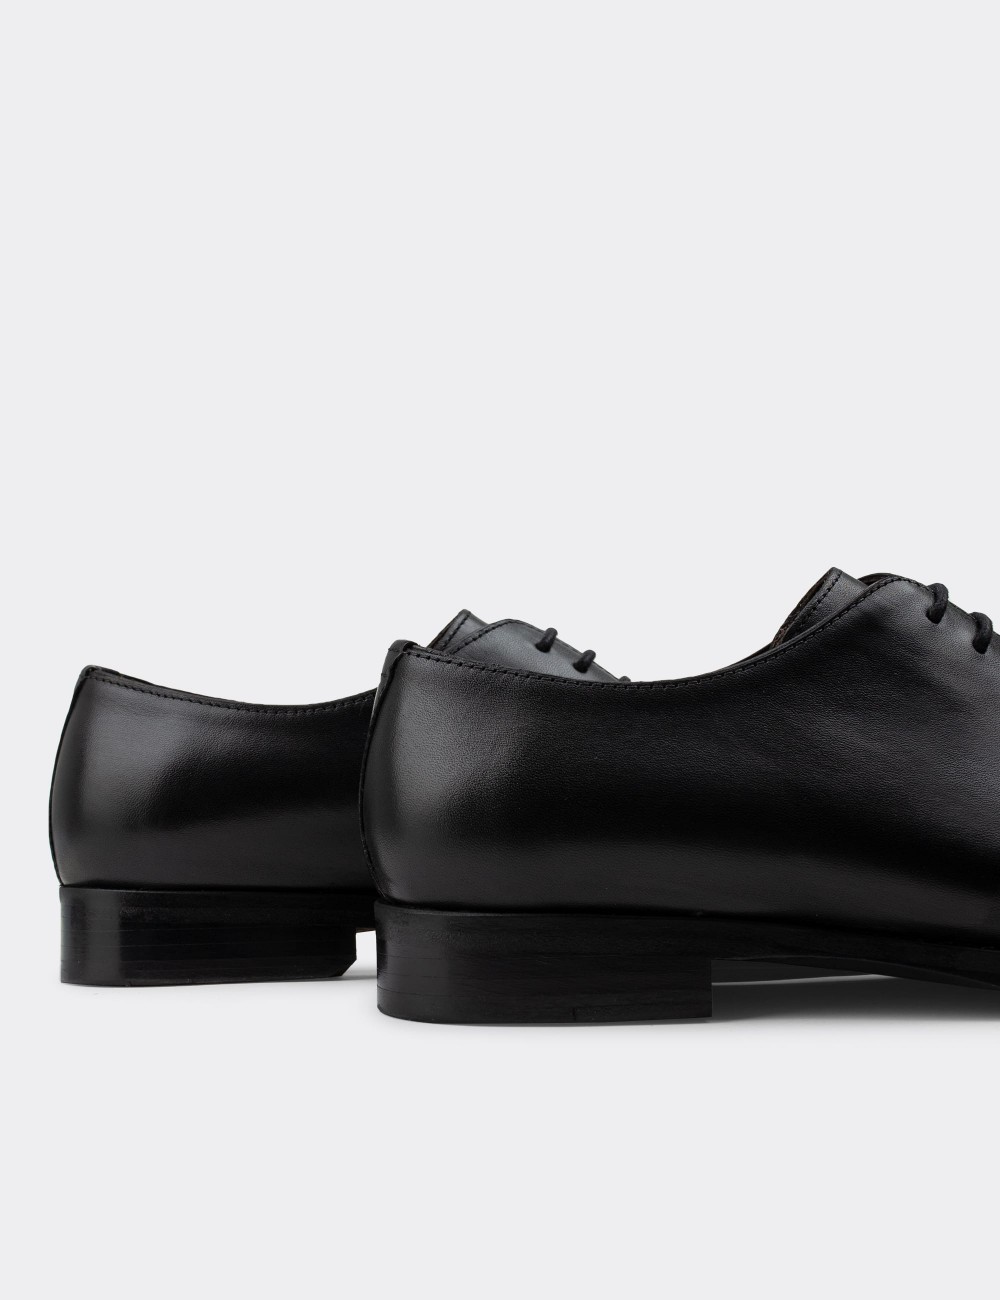 Black  Leather Classic Shoes - 01830MSYHK01